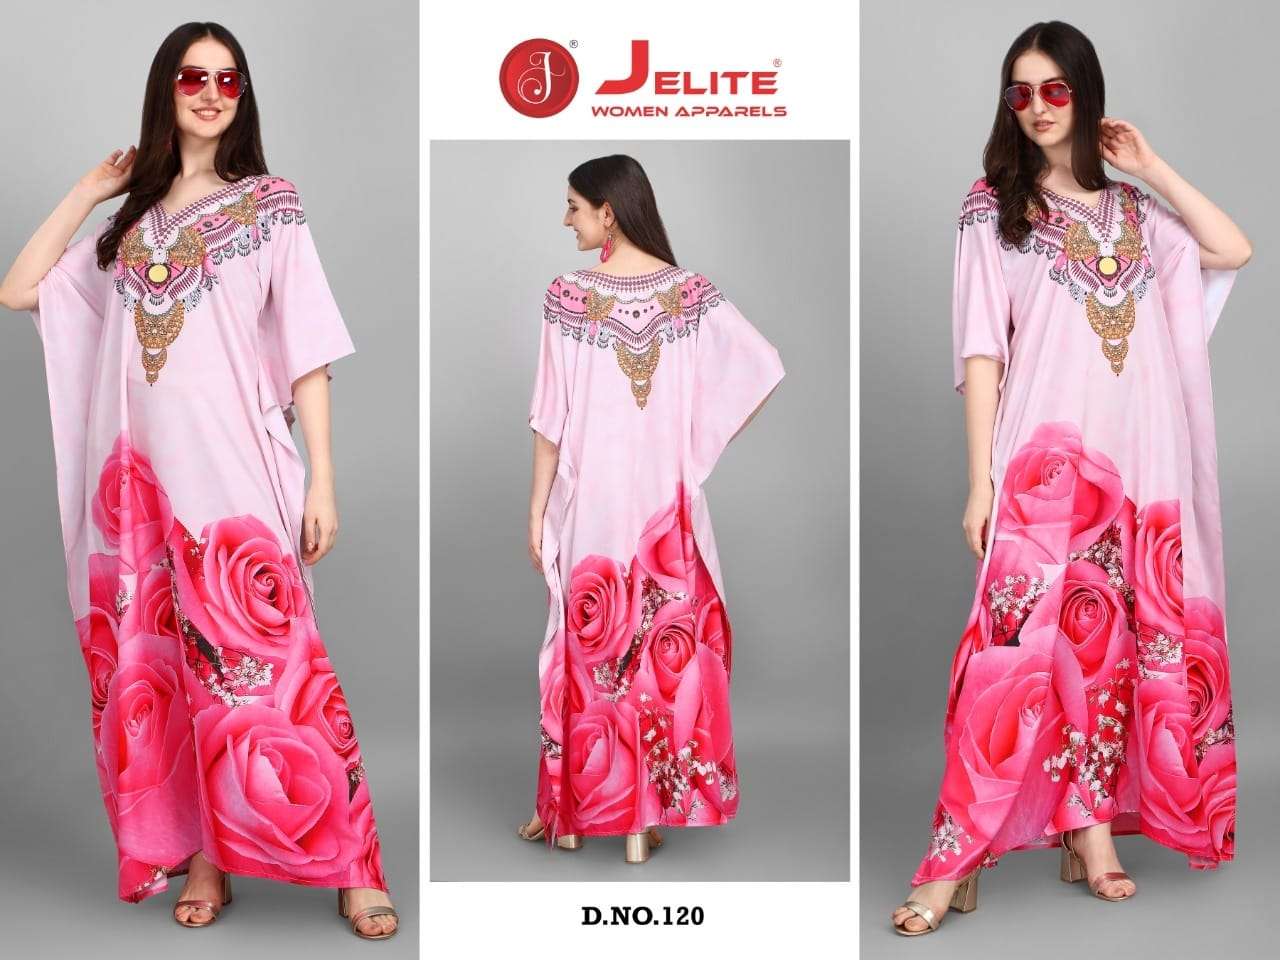 AFREEN VOL-3 BY JELITE 117 TO 124 SERIES DESIGNER WEAR COLLECTION BEAUTIFUL STYLISH FANCY COLORFUL PARTY WEAR & OCCASIONAL WEAR POLYSTER CREPE GOWNS AT WHOLESALE PRICE